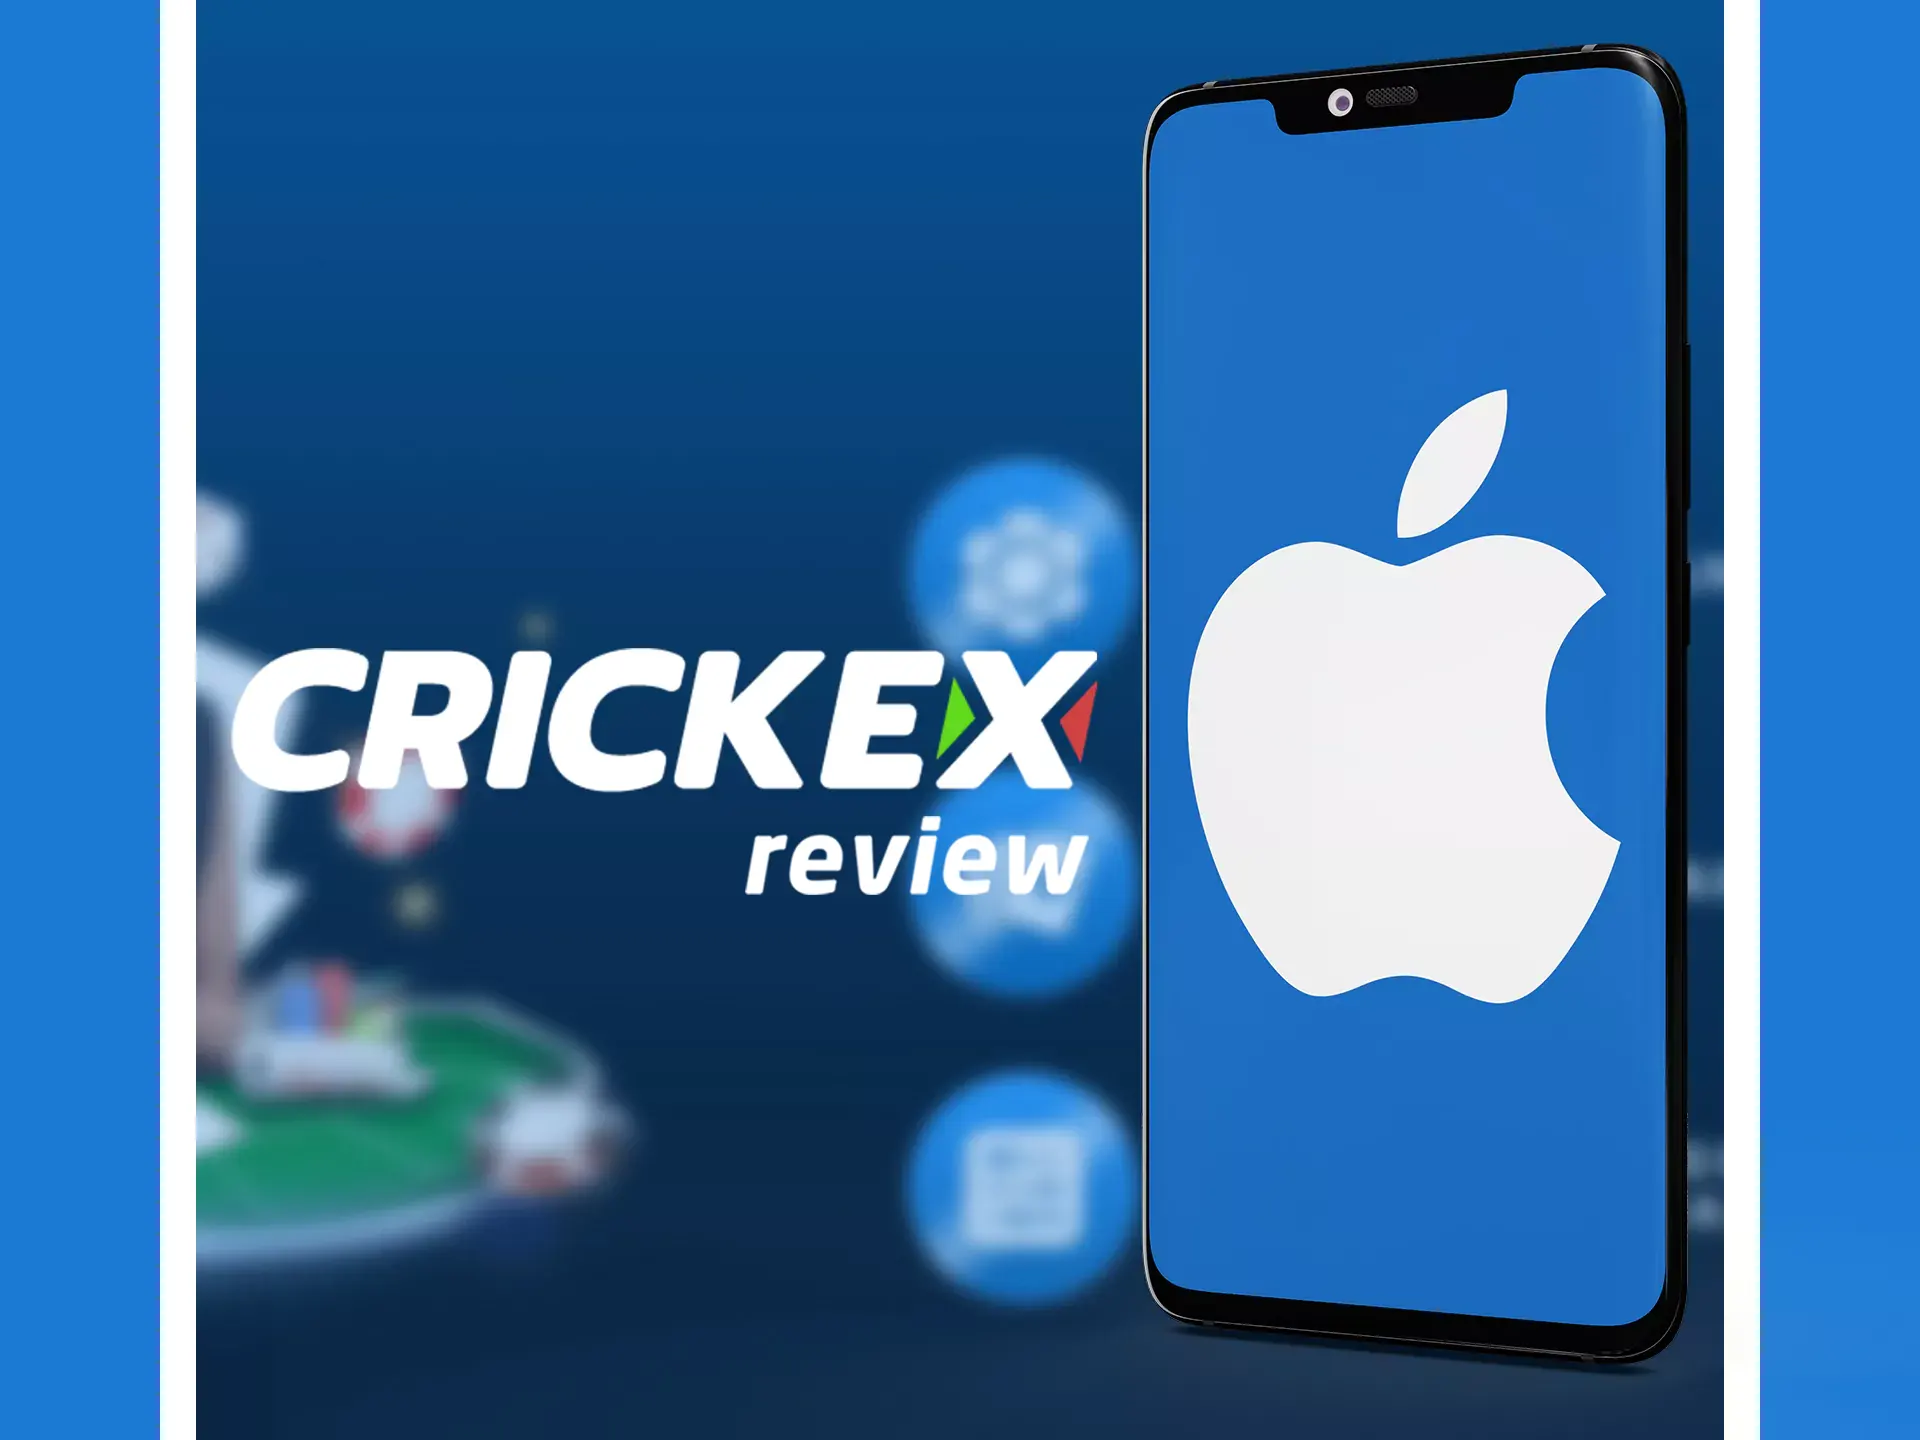 iOS devices support the mobile version of the Crickex site.